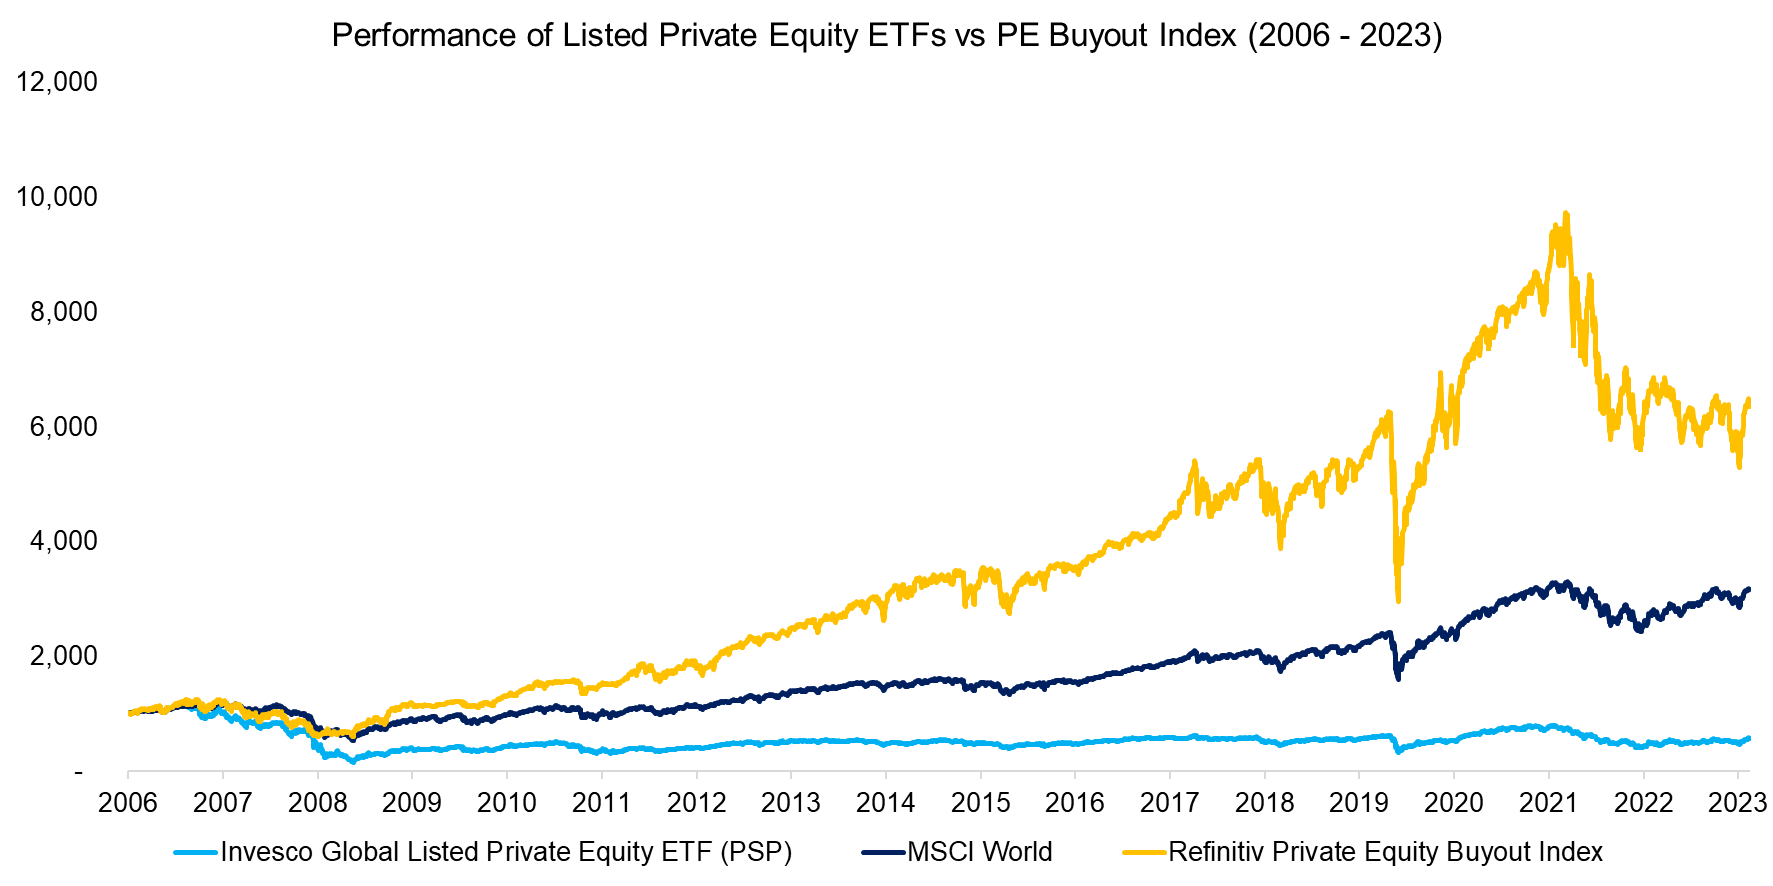 Performance of Listed Private Equity ETFs vs PE Buyout Index (2006 - 2023)